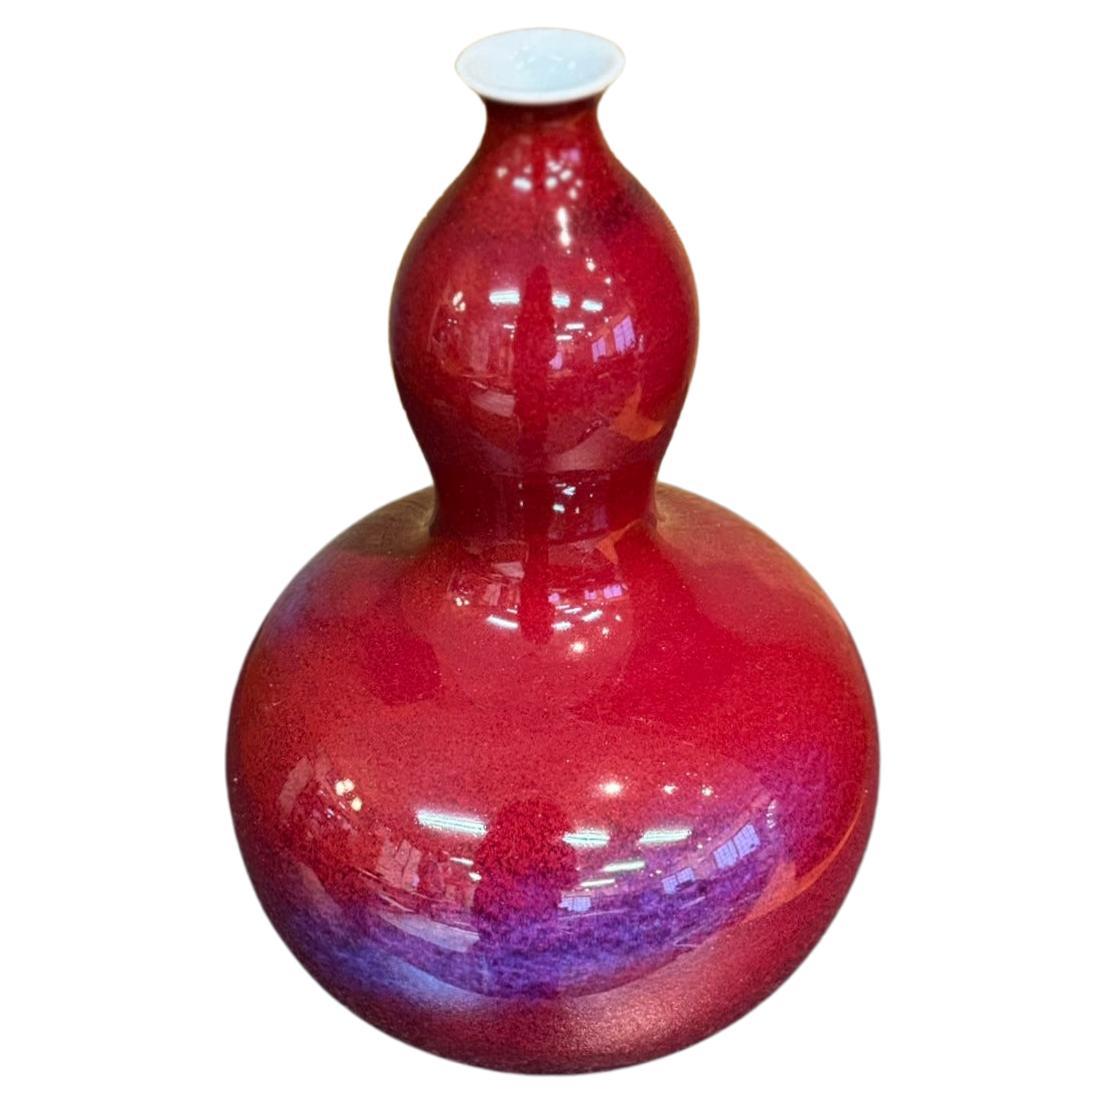 Exceptional Japanese contemporary decorative porcelain vase, hand-glazed in vivid red and blue/purple on a stunning gourd-shaped body, from the extraordinary signature Galaxy series by highly celebrated award-winning master porcelain artist of the